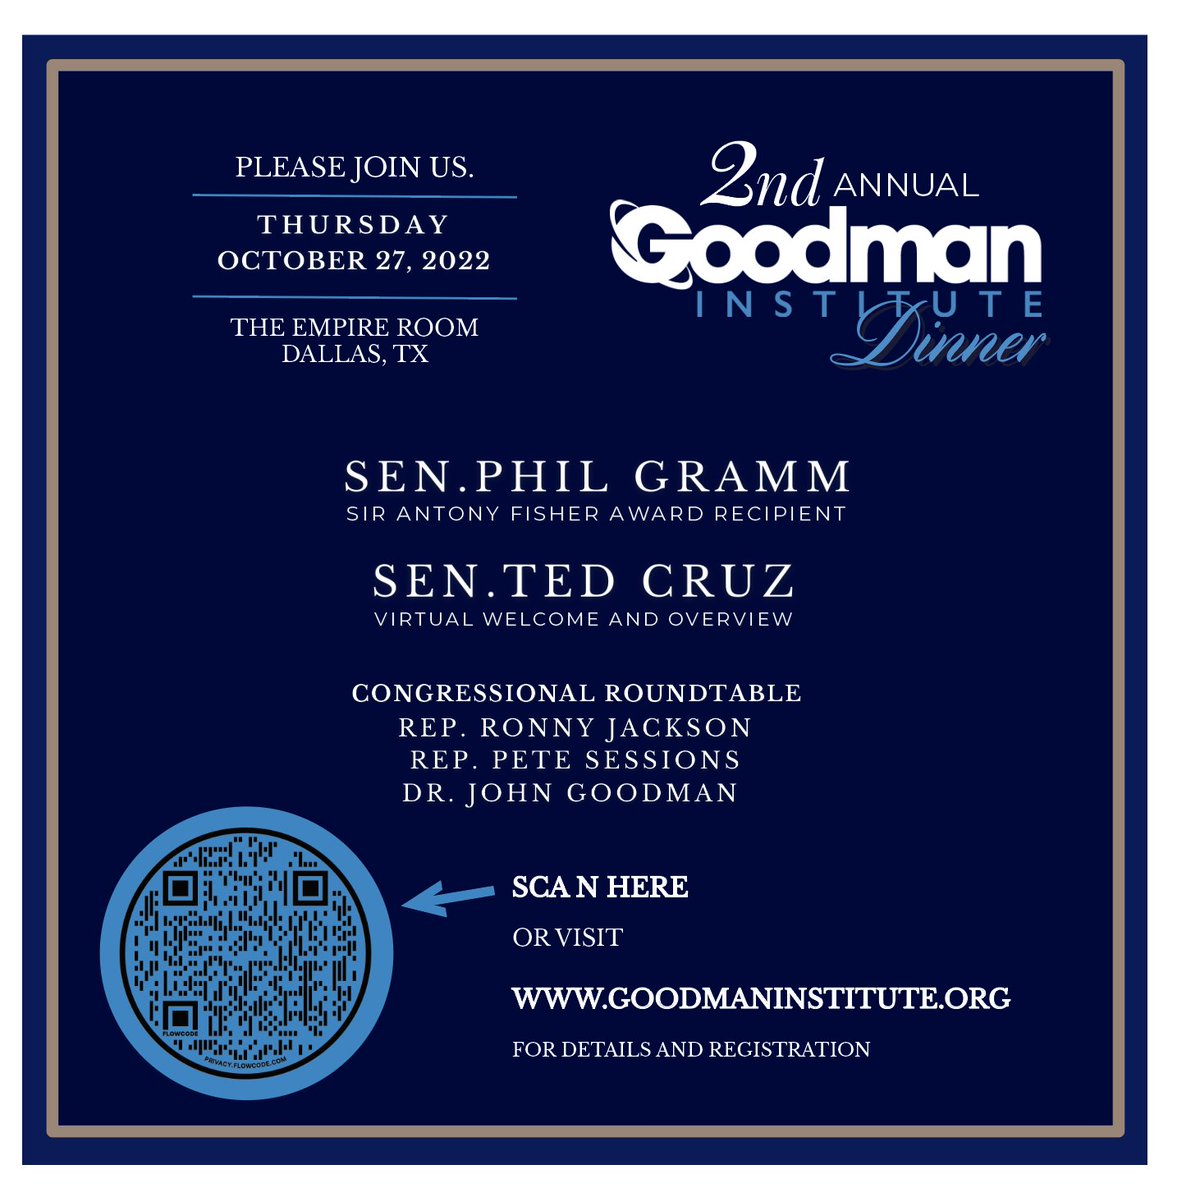 Join us next Thursday, October 27th for our Second Annual Goodman Institute Dinner. Visit the following link to purchase your tickets! trifectaem.regfox.com/goodman-instit… #Dallastx #GoodmanInstitute #dinner